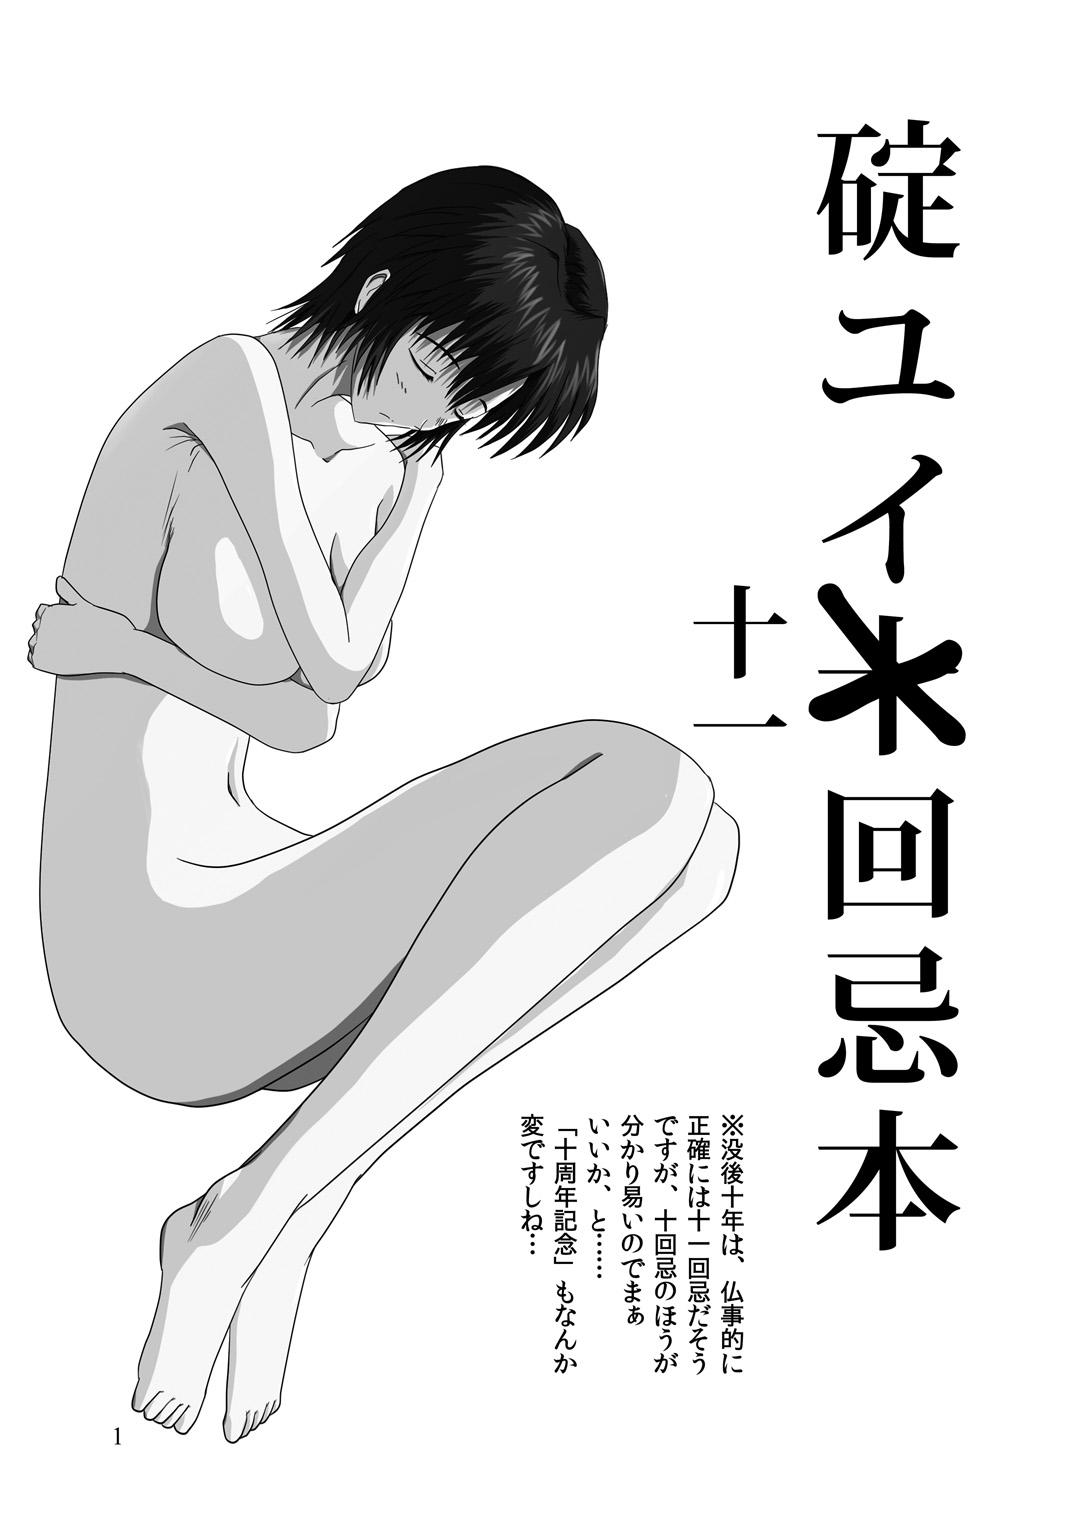 Celebrity Yui Ikari 10th Anniversary Book - beyond the time - Neon genesis evangelion Speculum - Picture 2